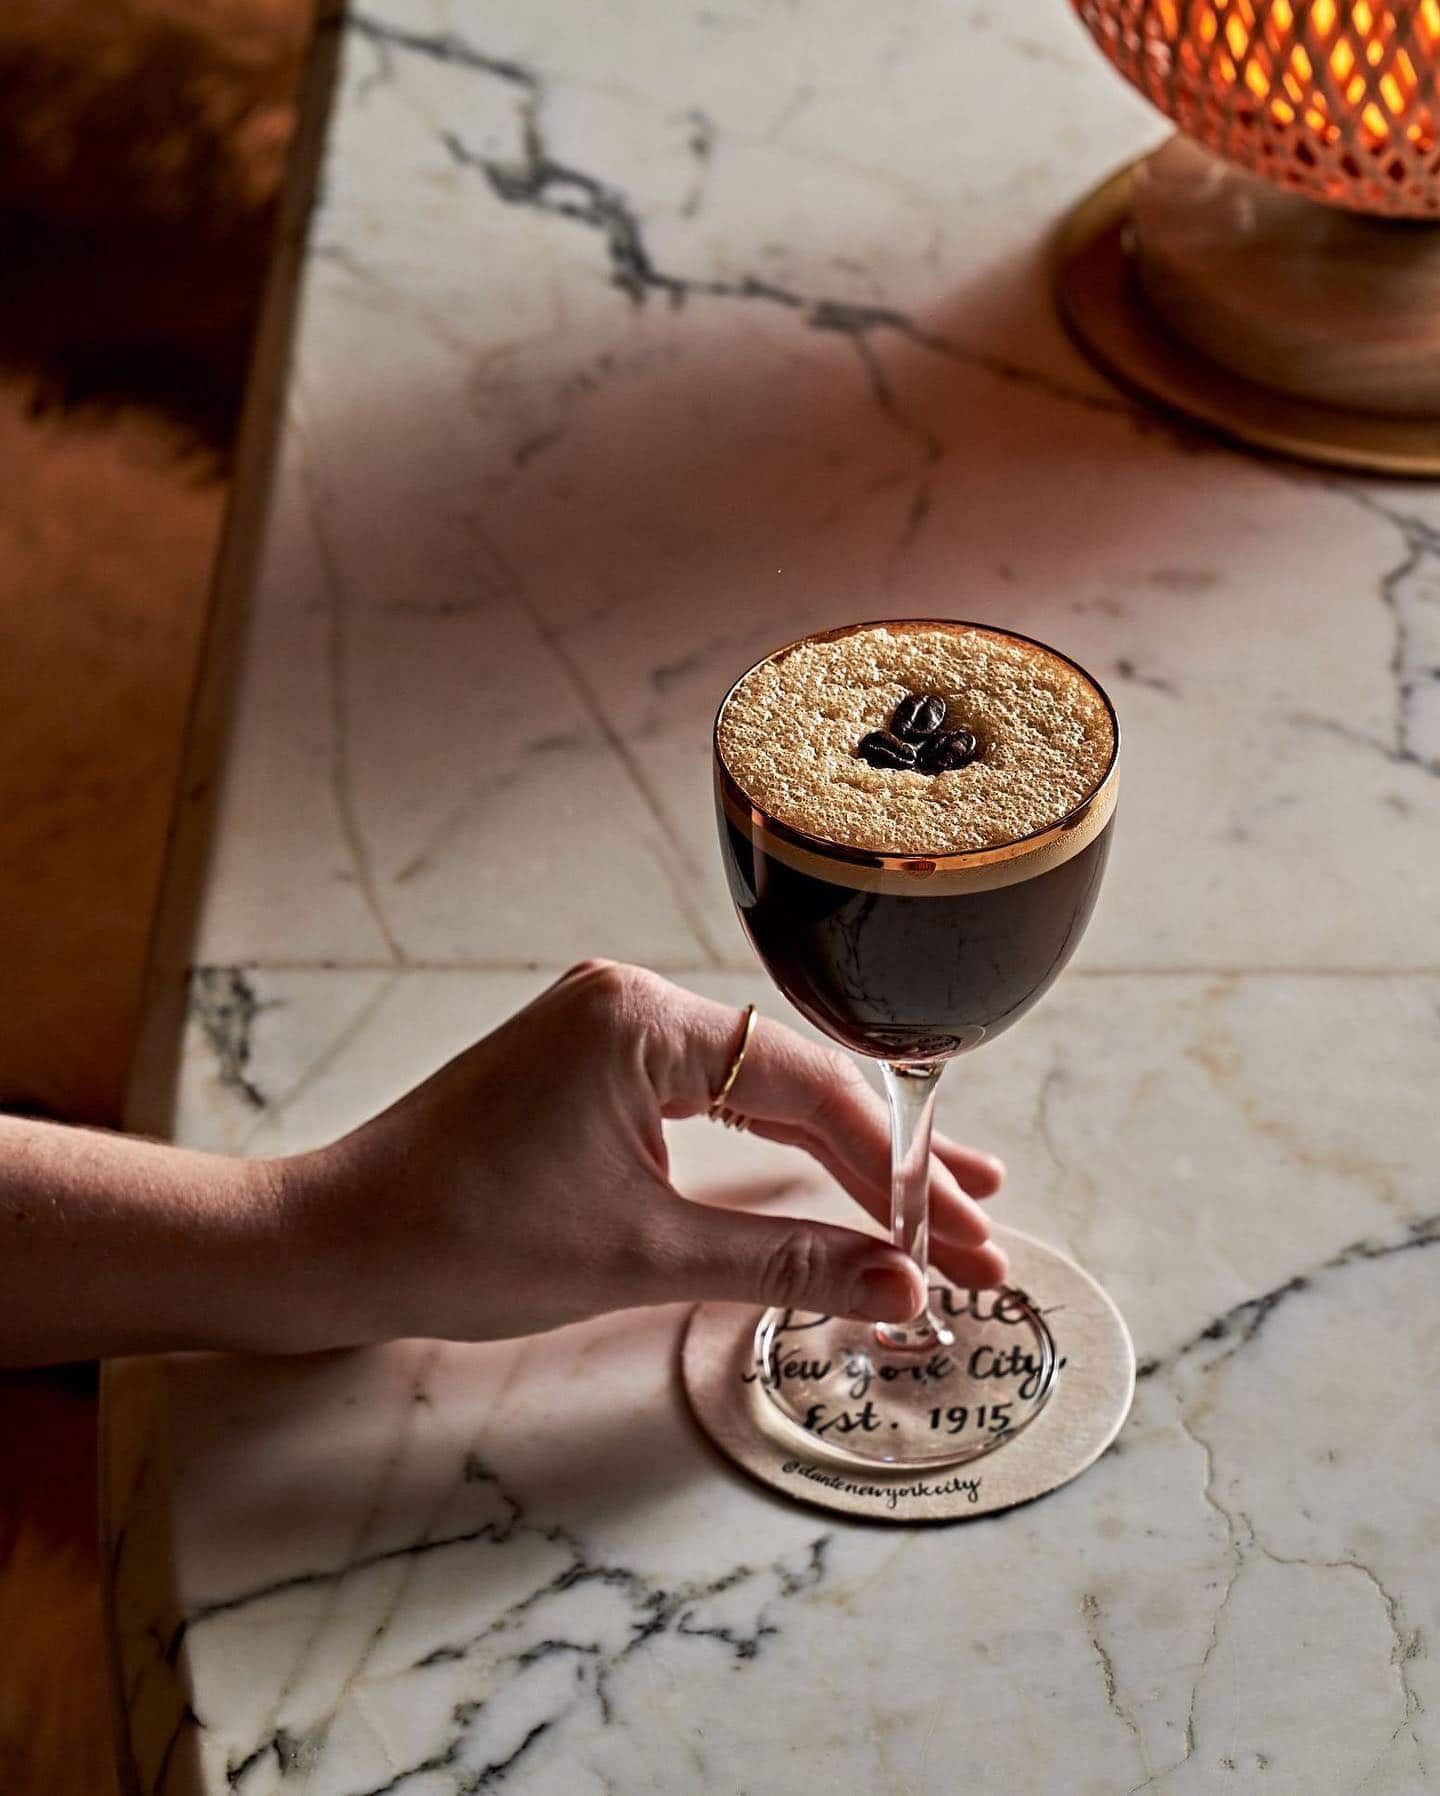 Finish your Friday with an Espresso Martini @pearlalley.nyc ✦ #TheSeaport